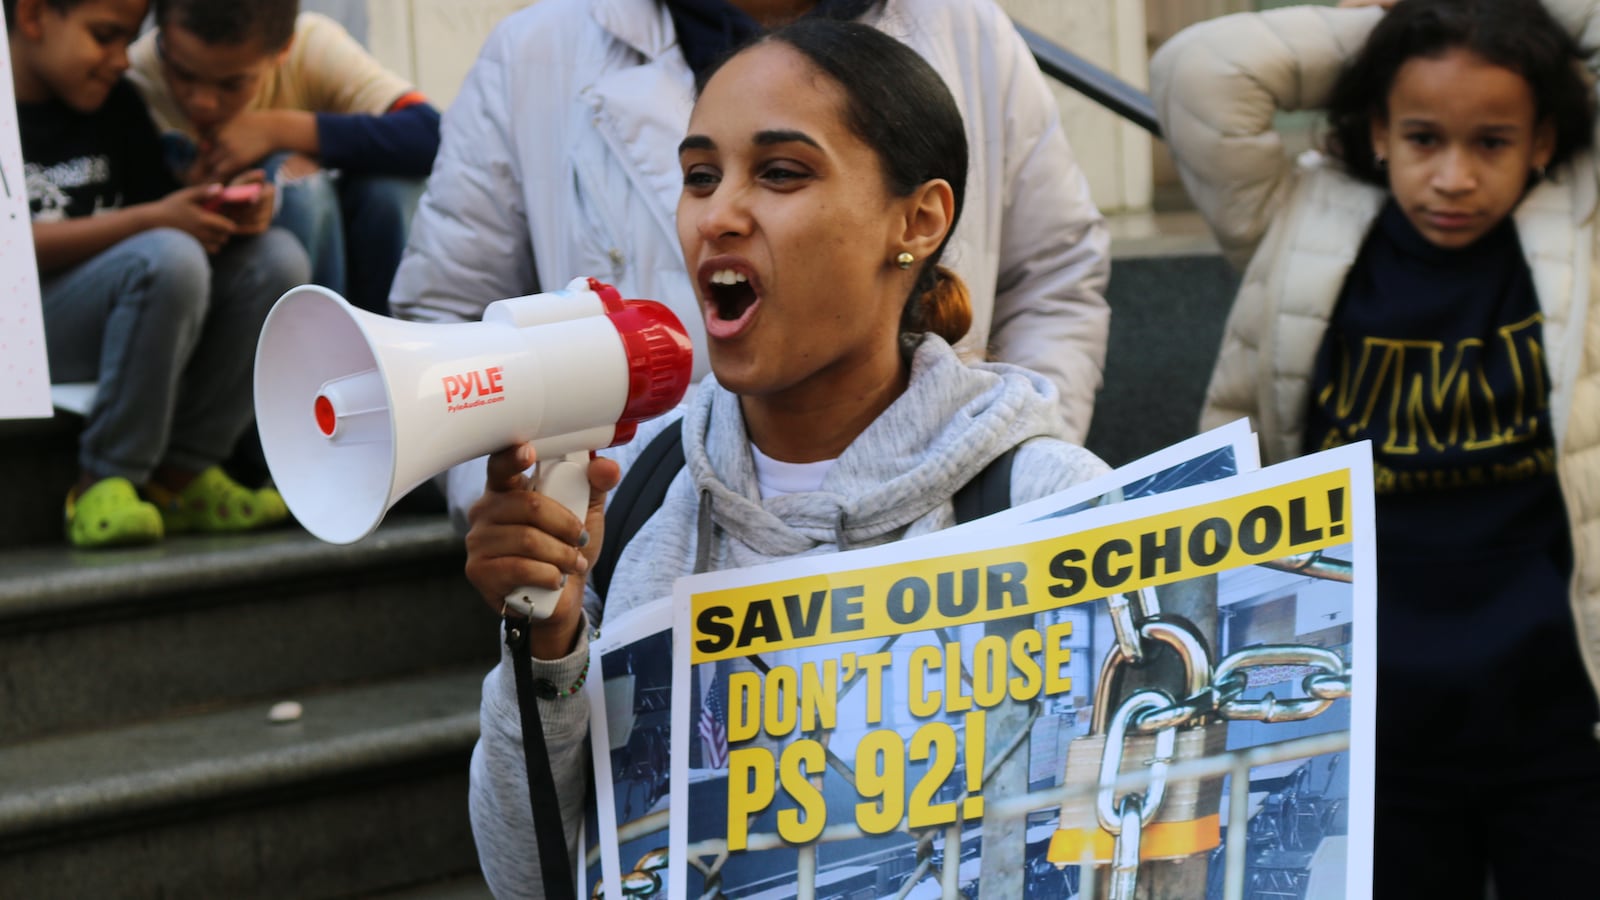 P.S. 92 parent Jeanelle Valet protested that school's closure at recent rally in front of the education department's headquarters.